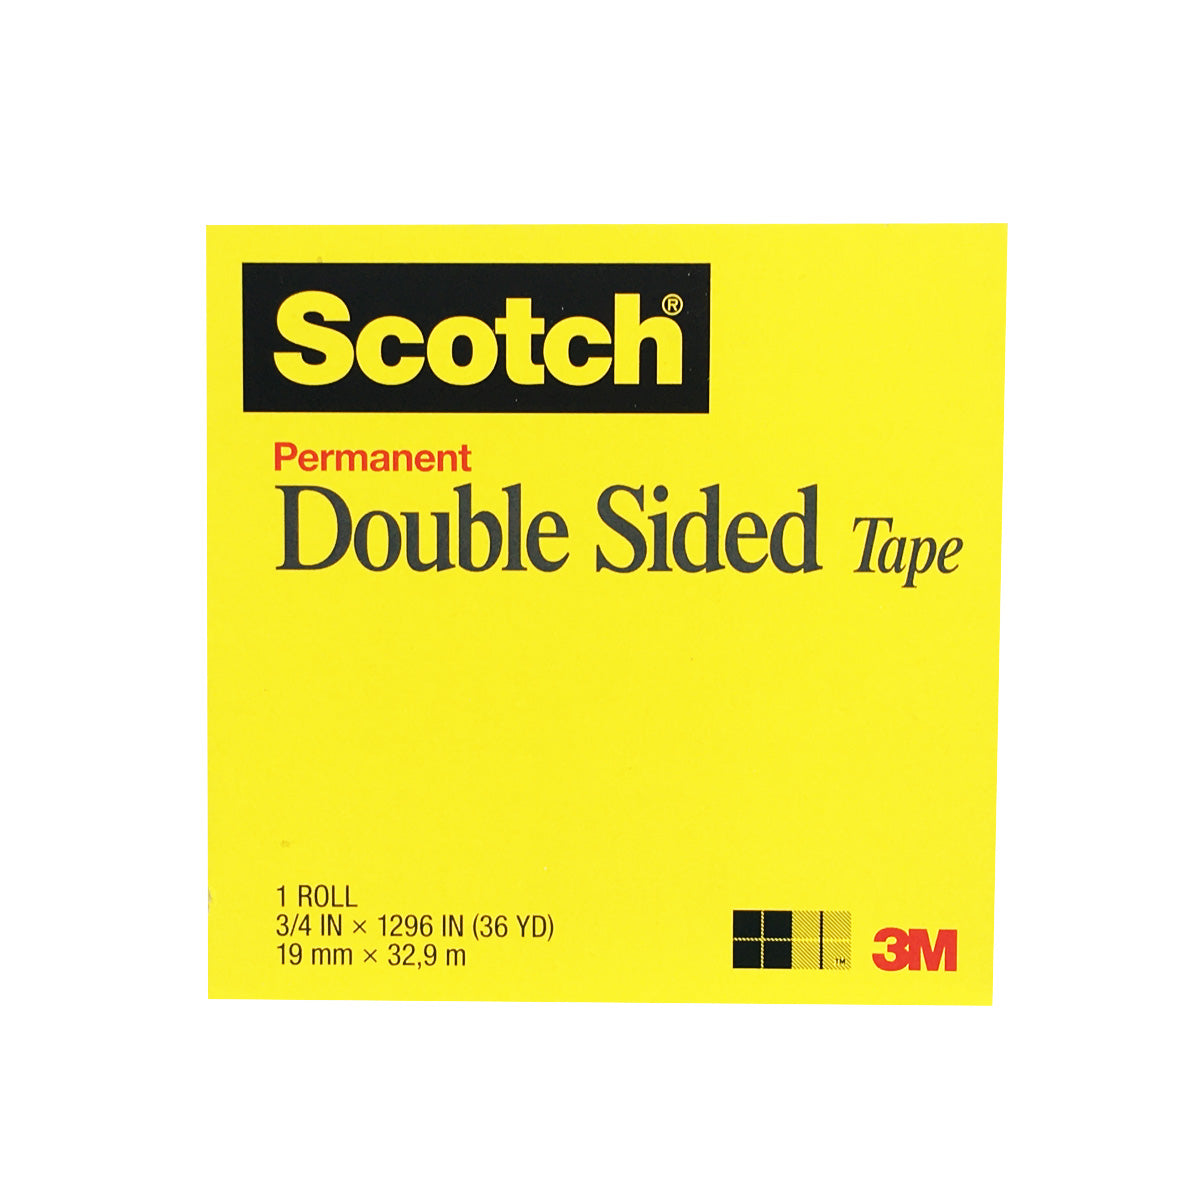 3M Scotch 665 Permanent Double Sided Tape